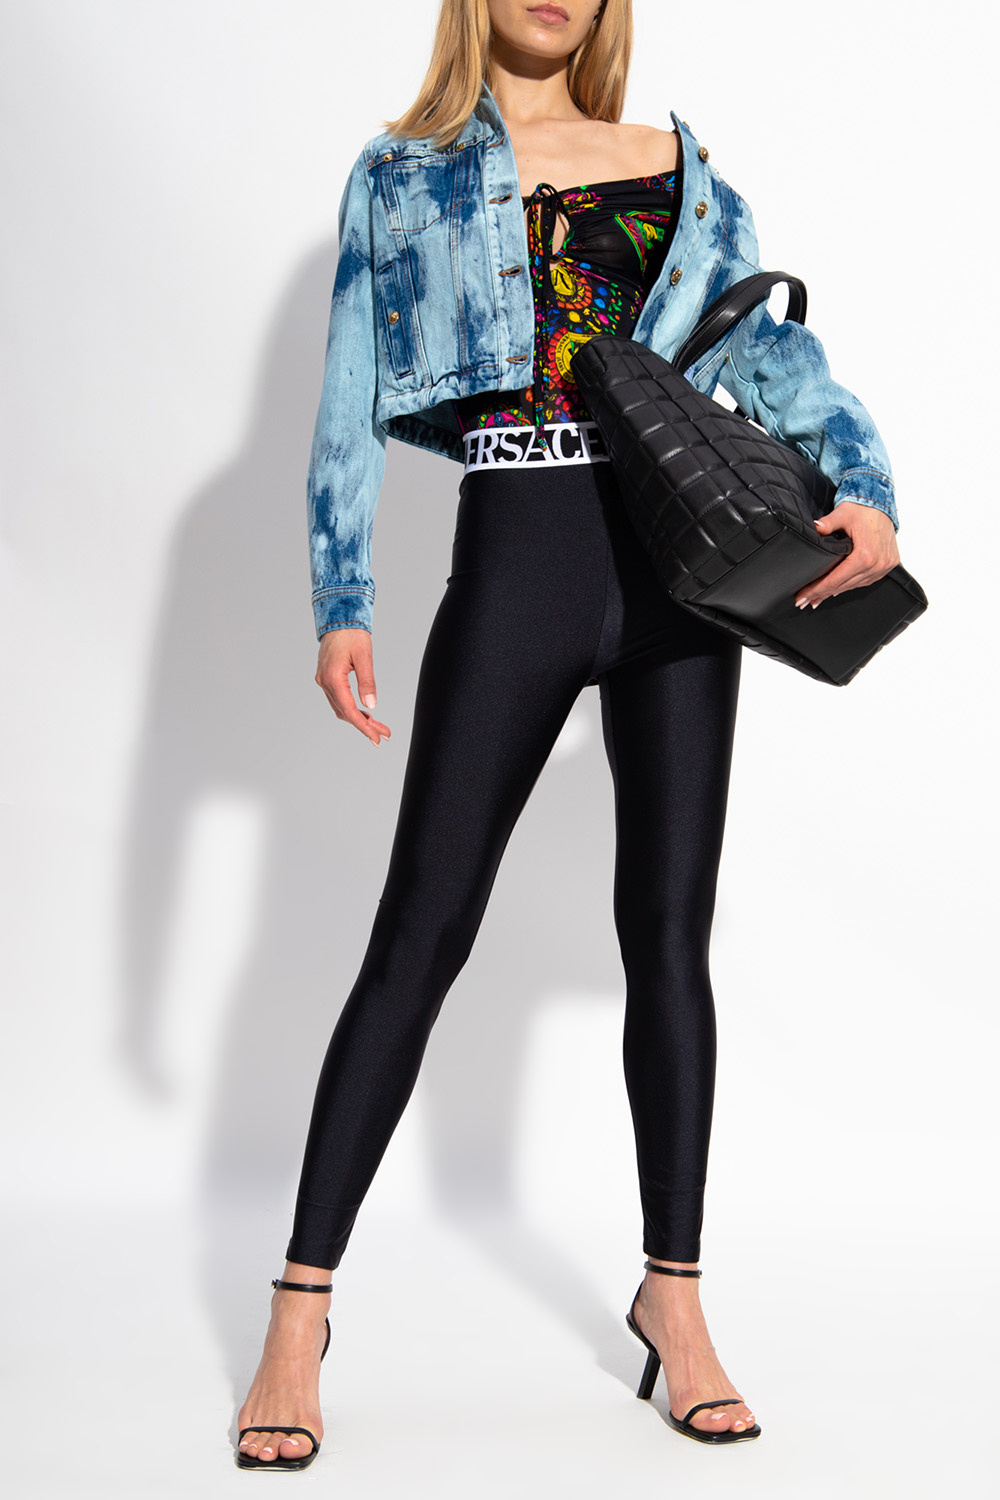 Versace  Outfits with leggings, Versace leggings, Fashion